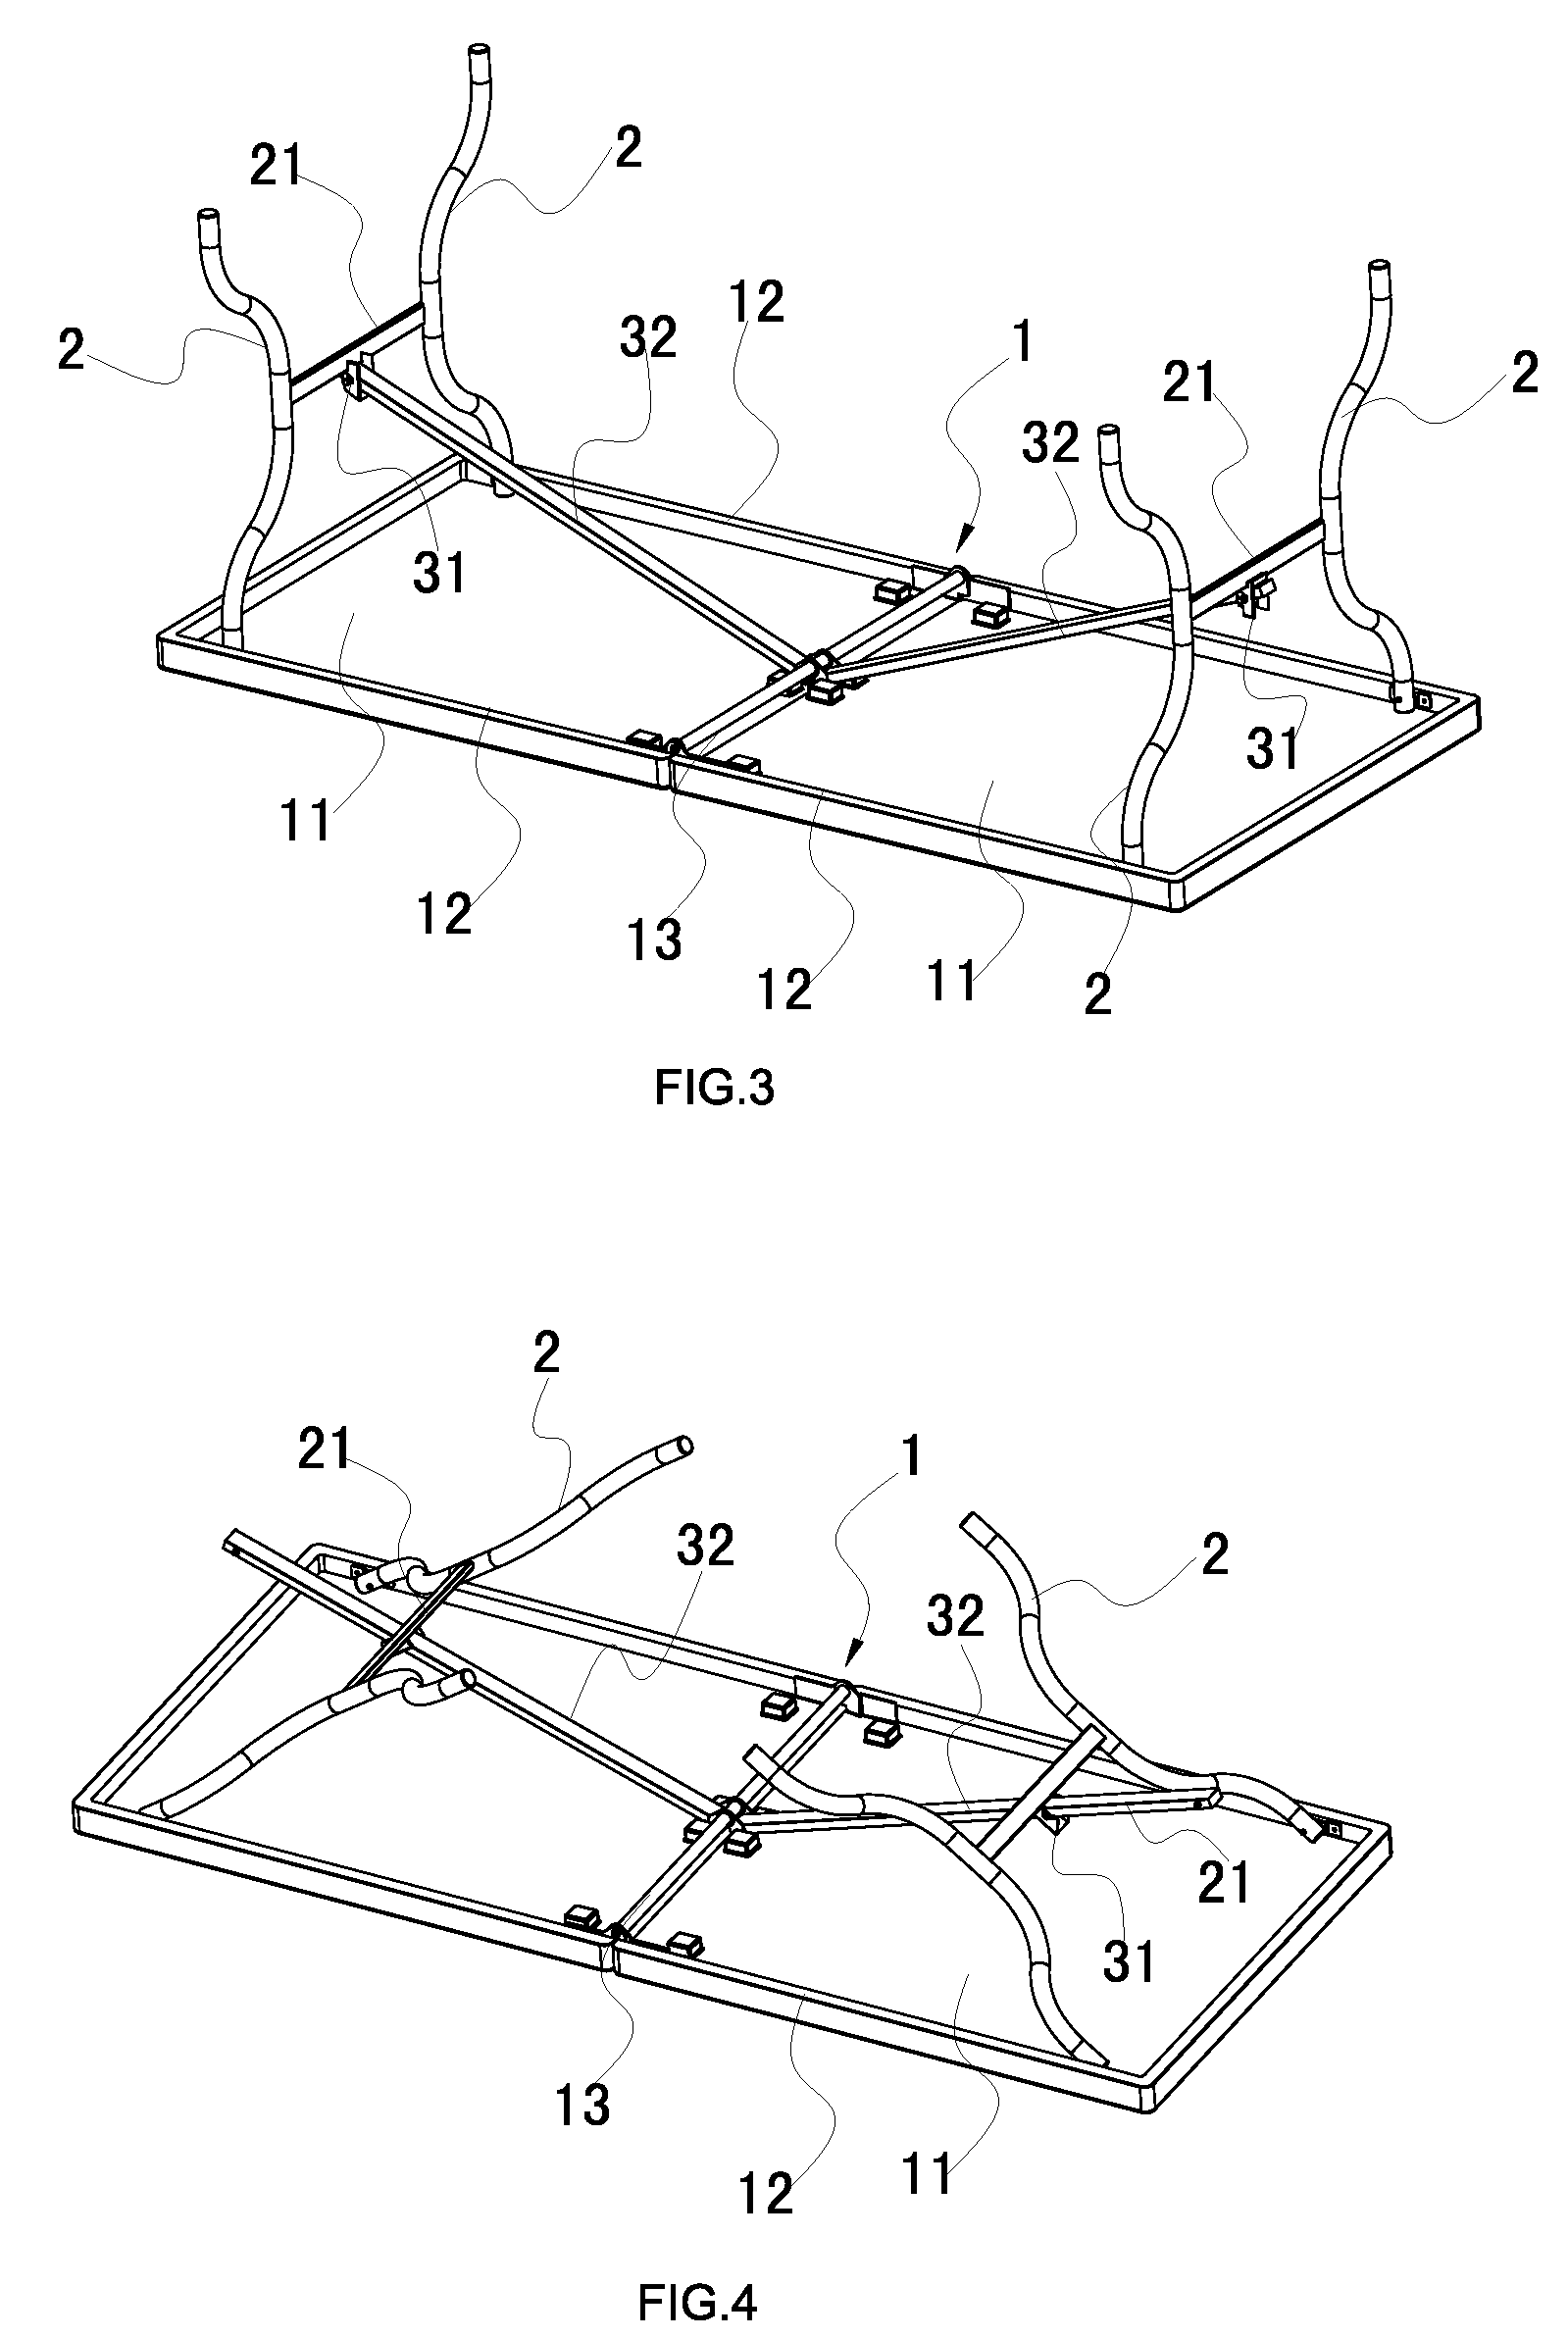 Folding assembly and foldaway table